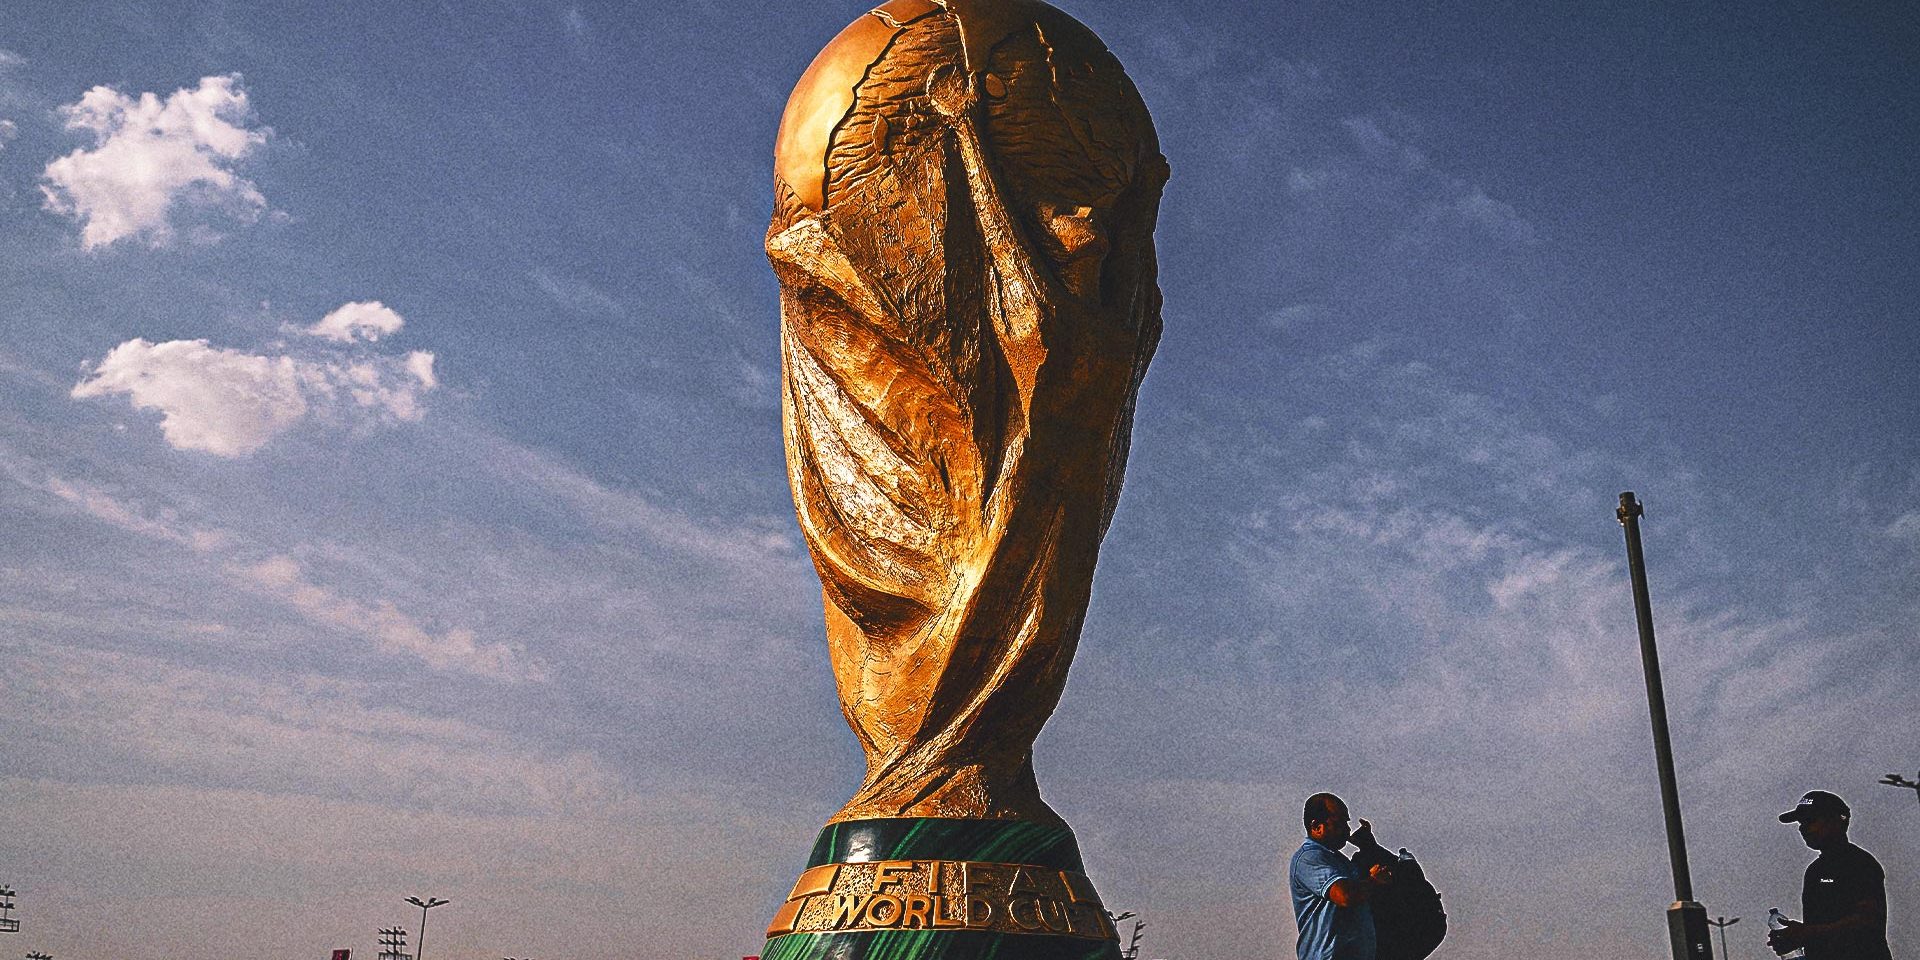 Saudi Arabia formally informs FIFA of its wish to host 2034 World Cup